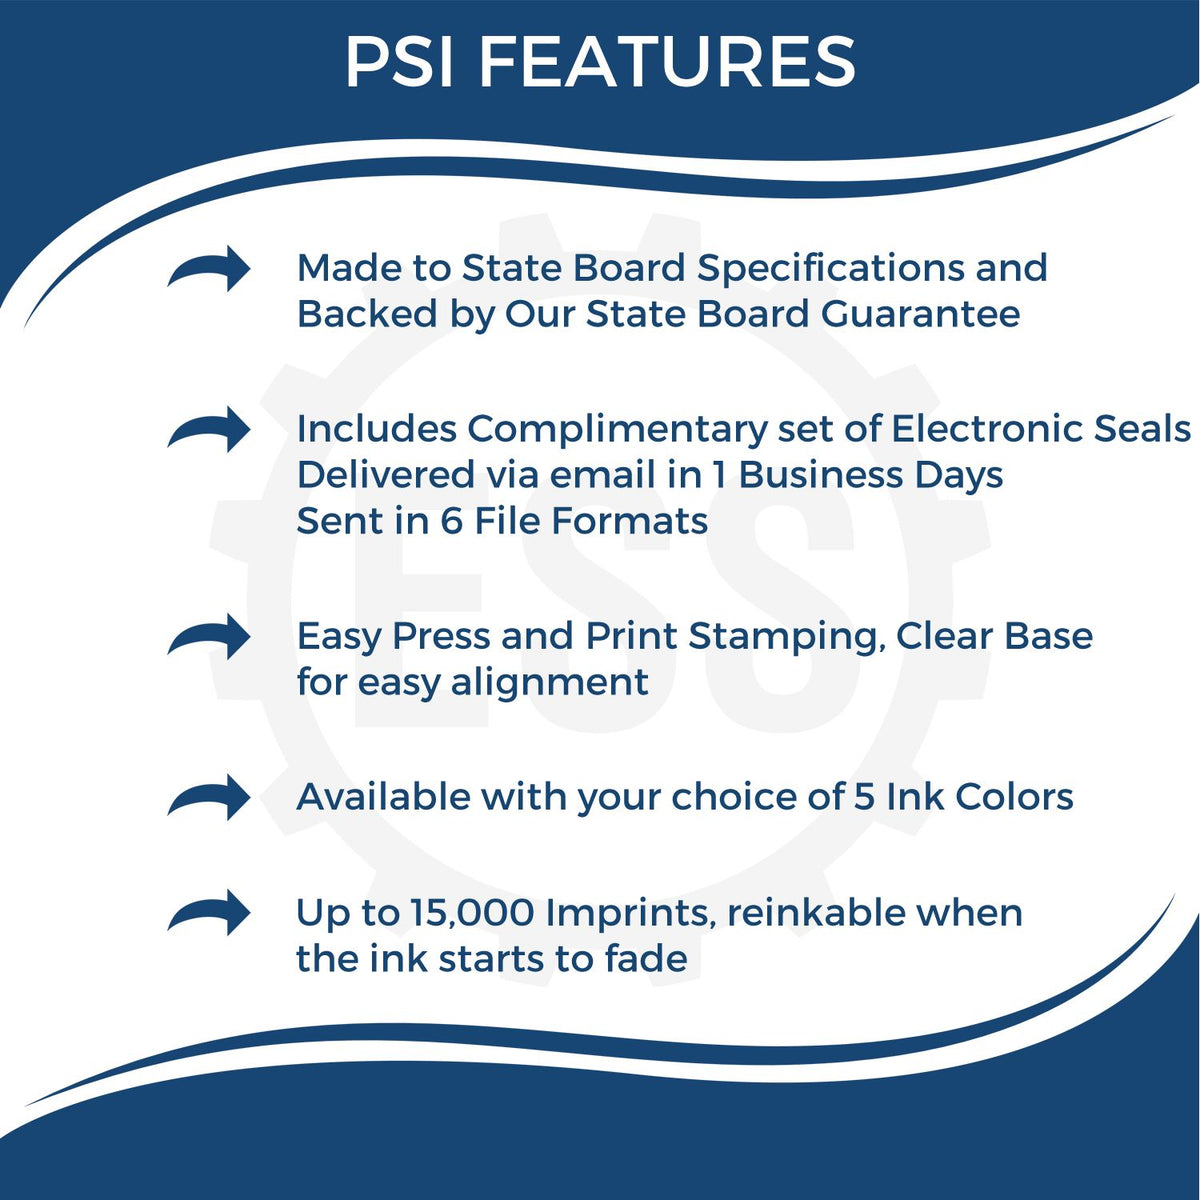 A picture of an infographic highlighting the selling points for the PSI Alabama Notary Stamp